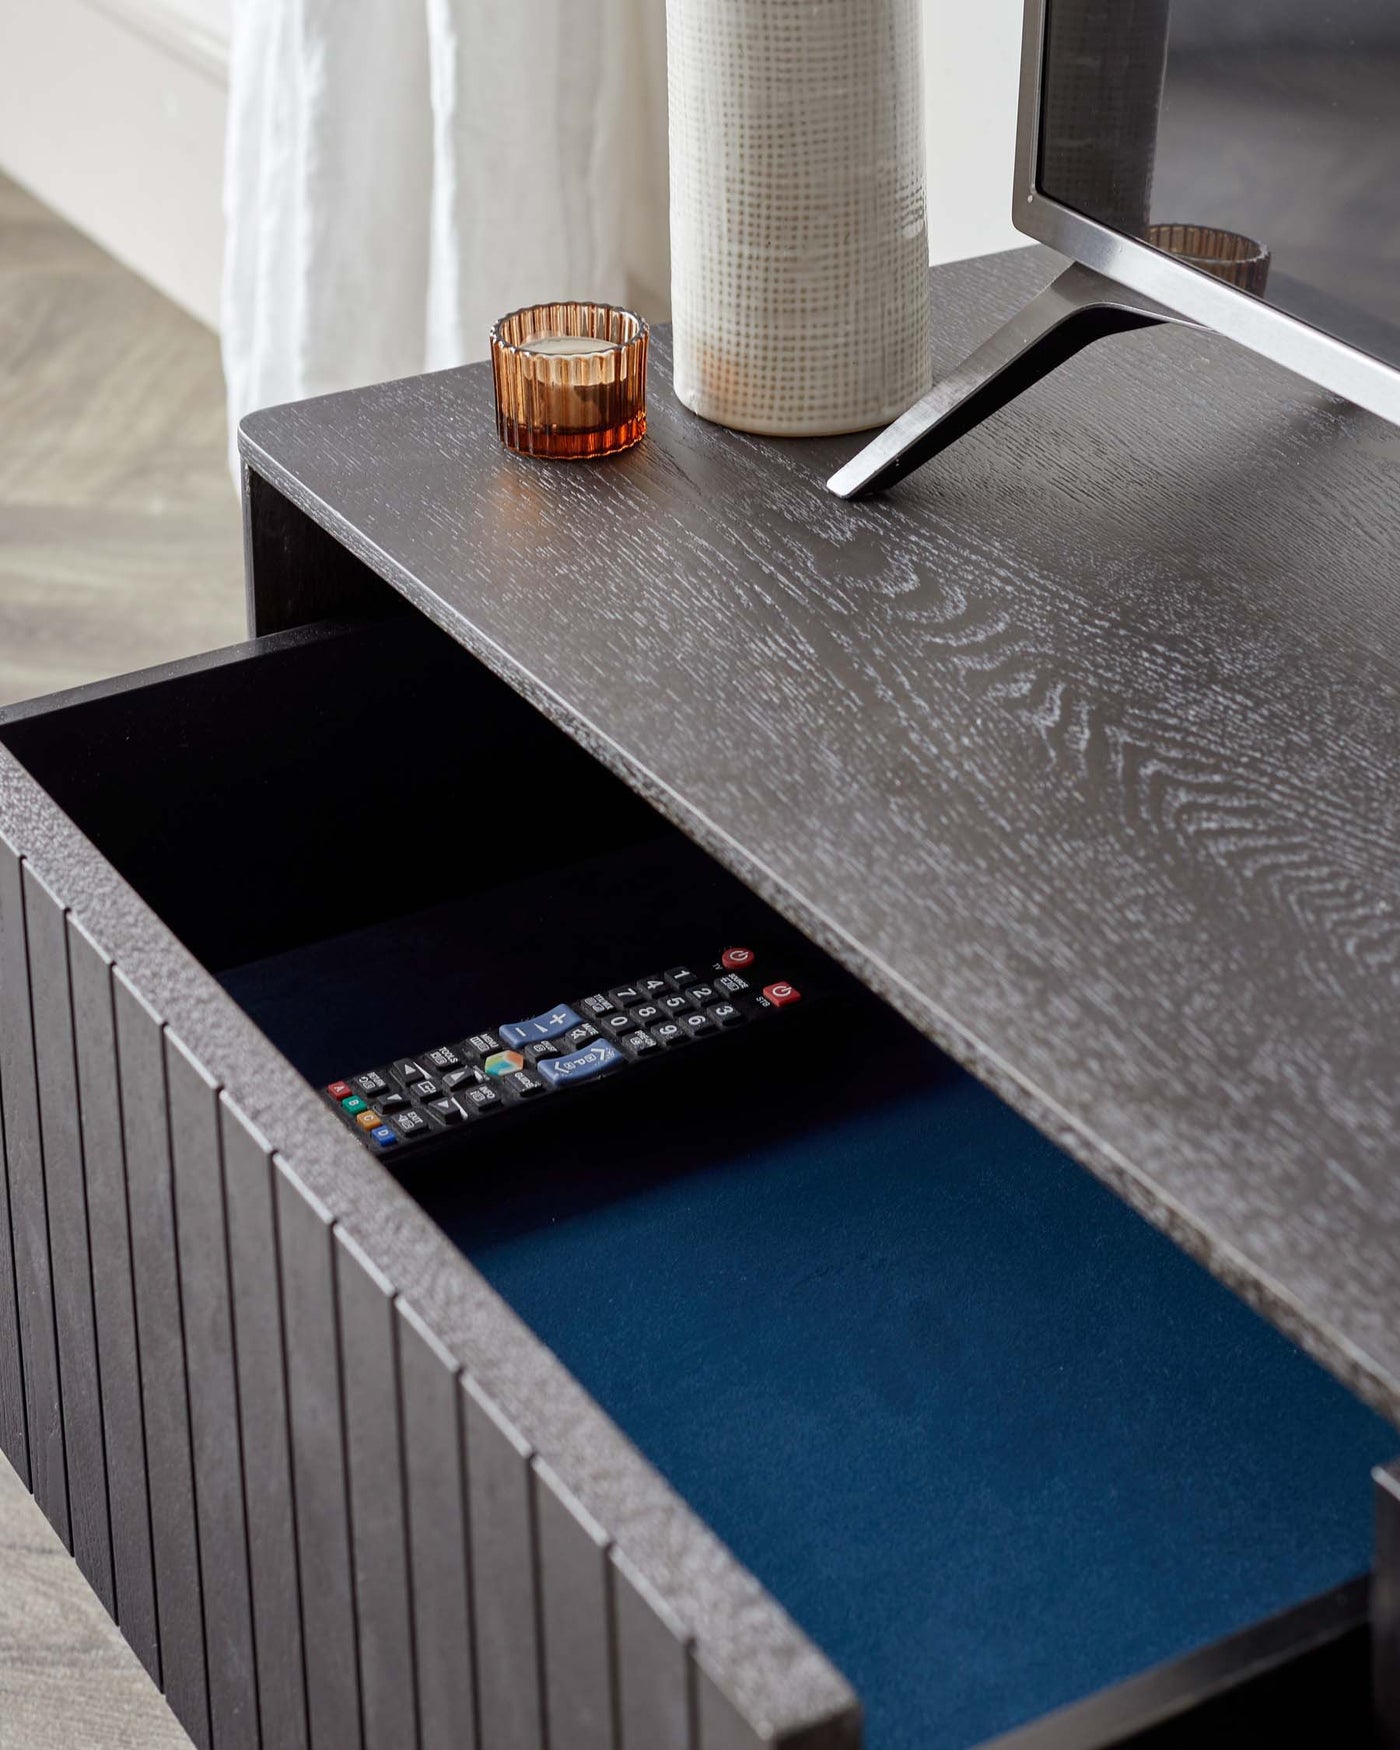 Contemporary dark wood textured side table with a pull-out drawer lined with blue felt, showcasing a minimalistic design and a sleek, modern metal drawer handle.